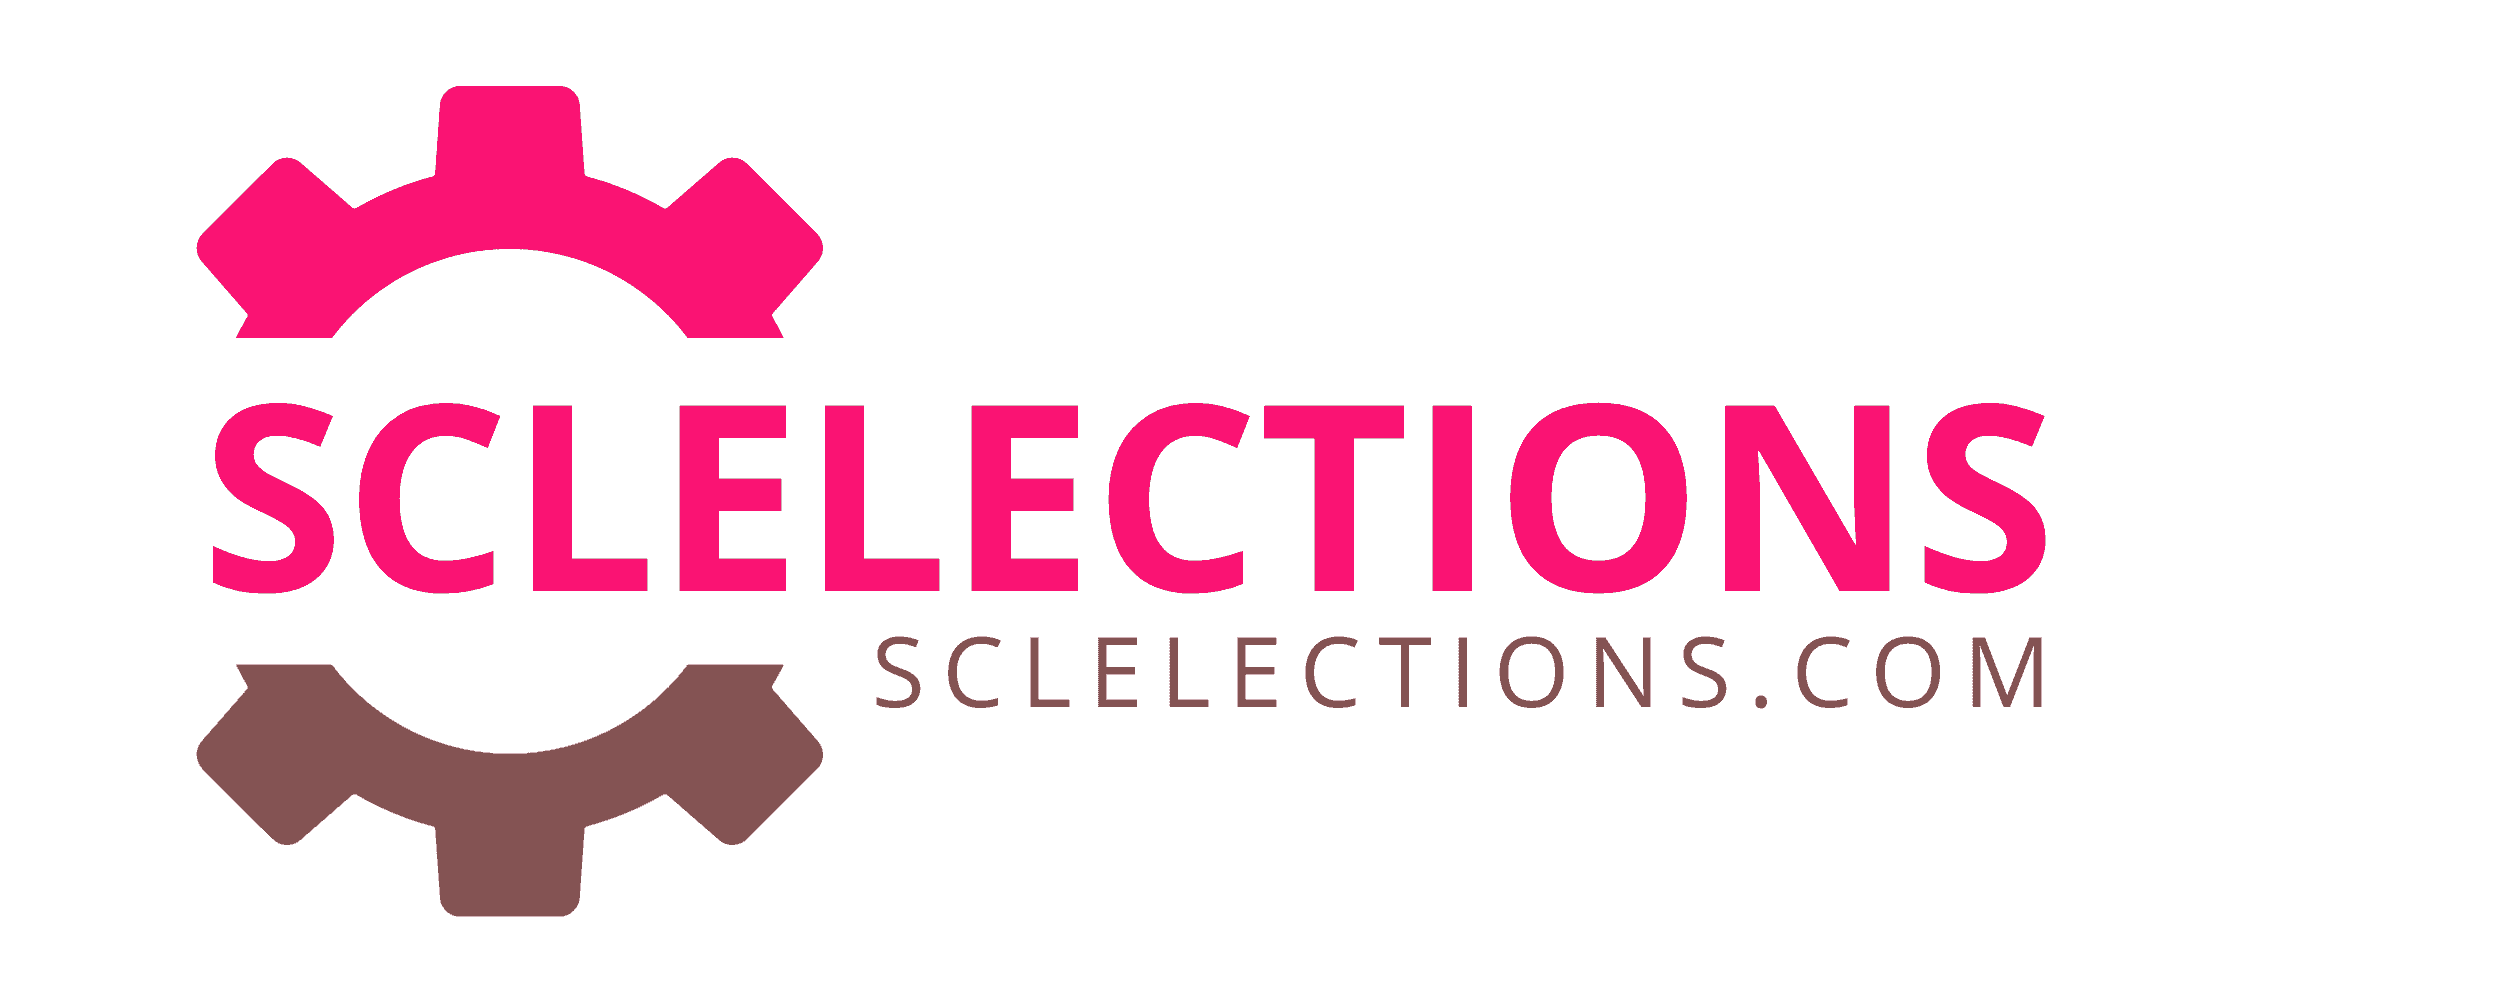 Sclelection